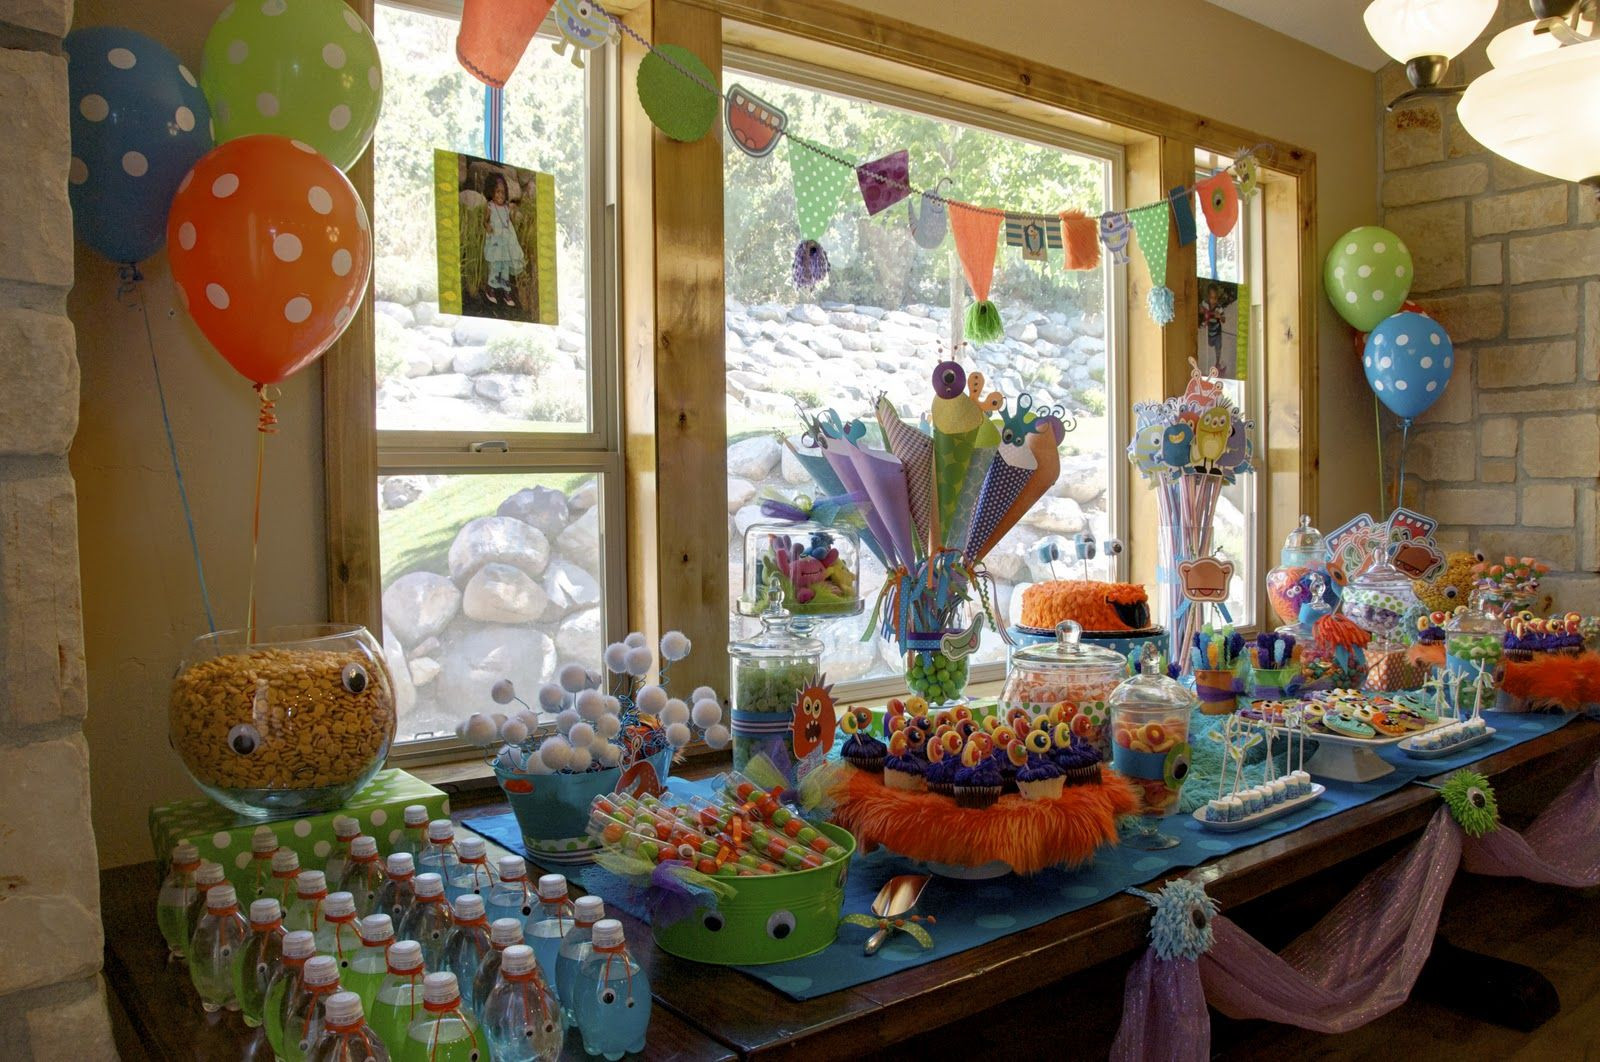 Winter Birthday Party Ideas For 3 Year Olds
 My friends birthday is in the winter and she wanteâ Š